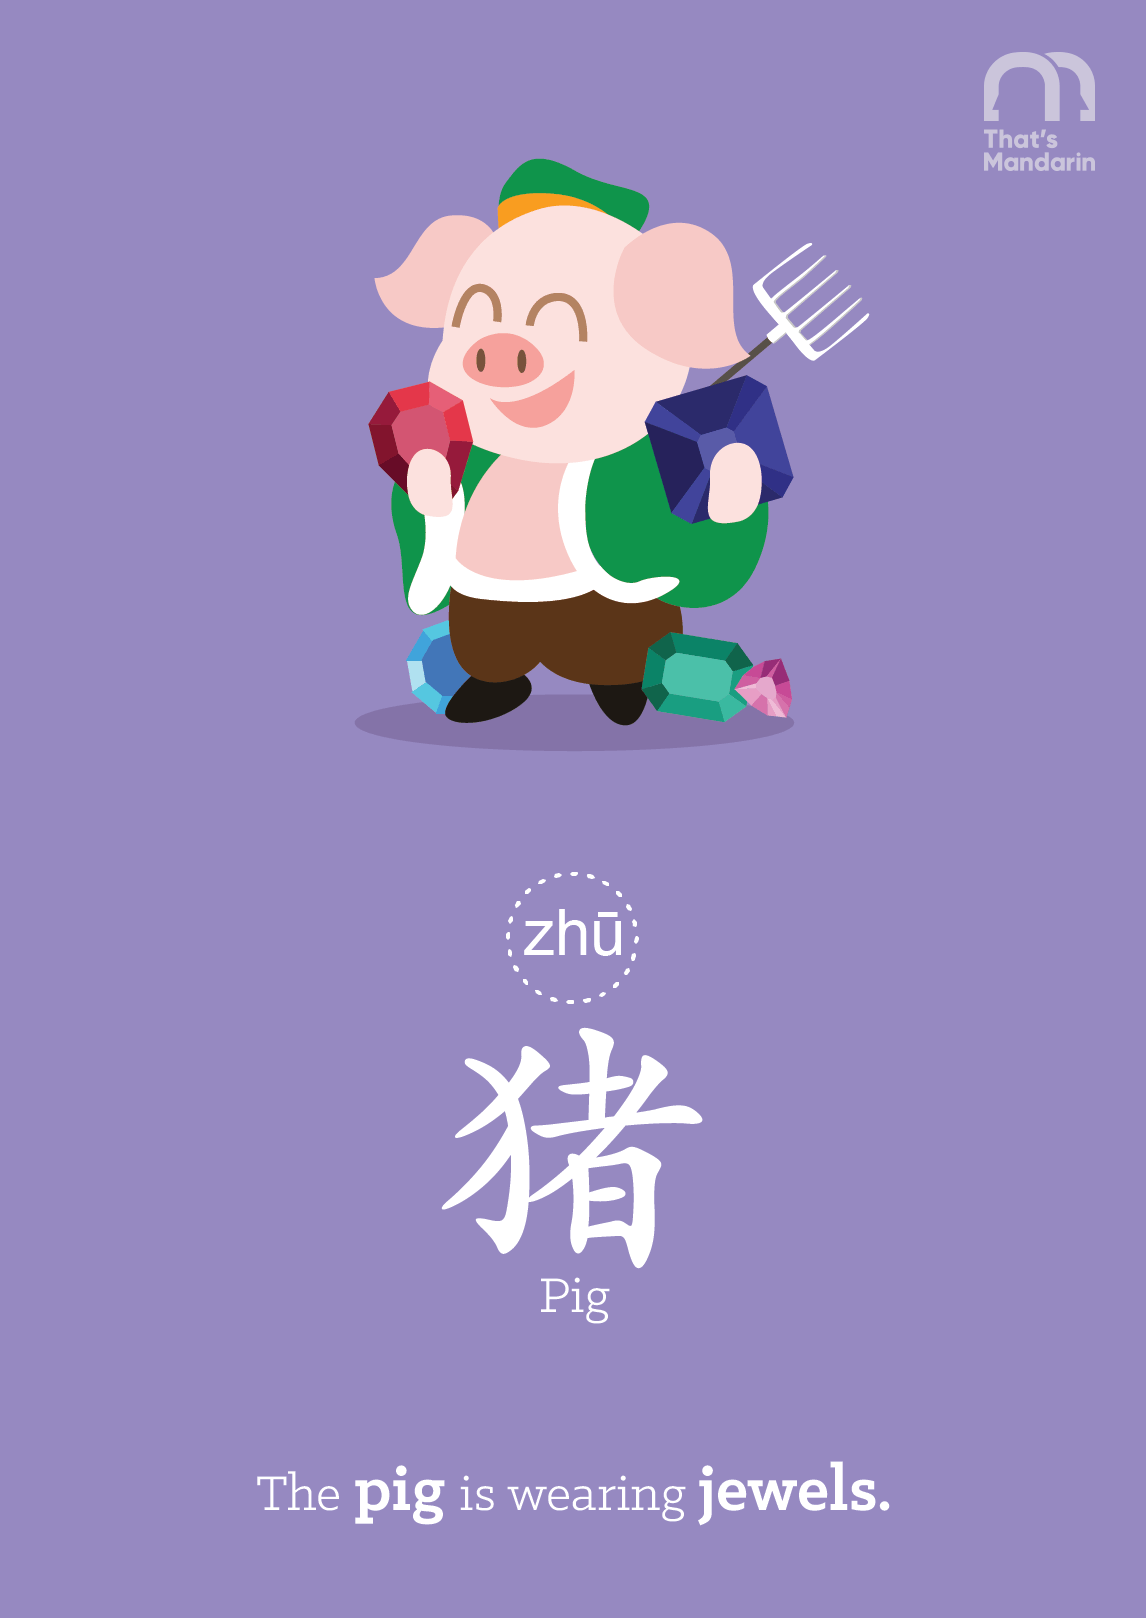 Pig (Chinese Animal Zodiacs) | Chinese Link Words | That's Mandarin